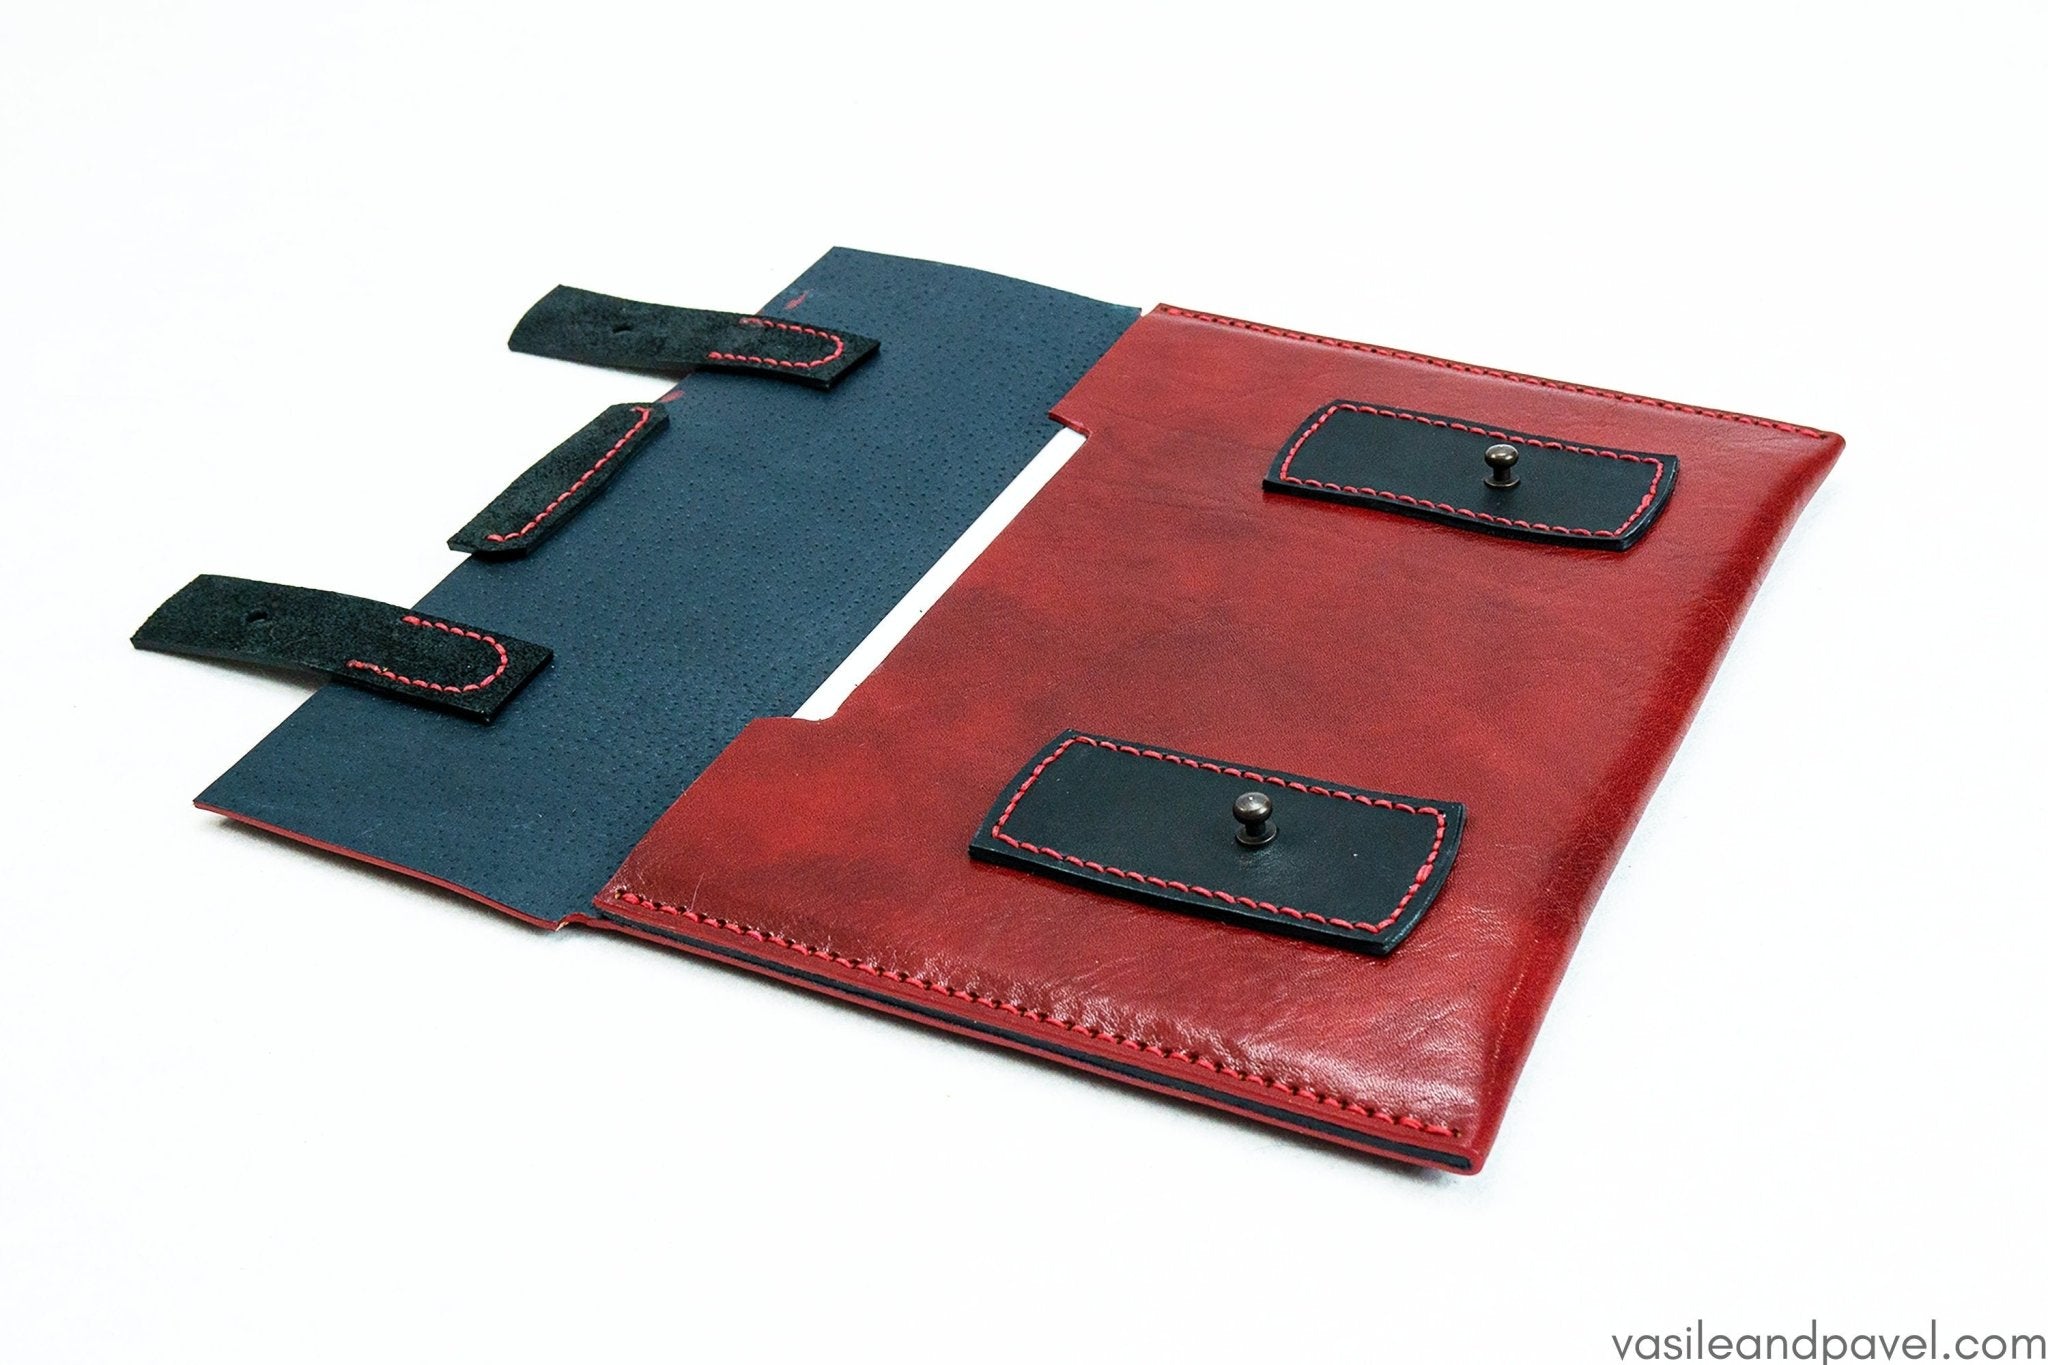 Tablet Case, PDF Pattern and Instructional Video by Vasile and Pavel - Vasile and Pavel Leather Patterns